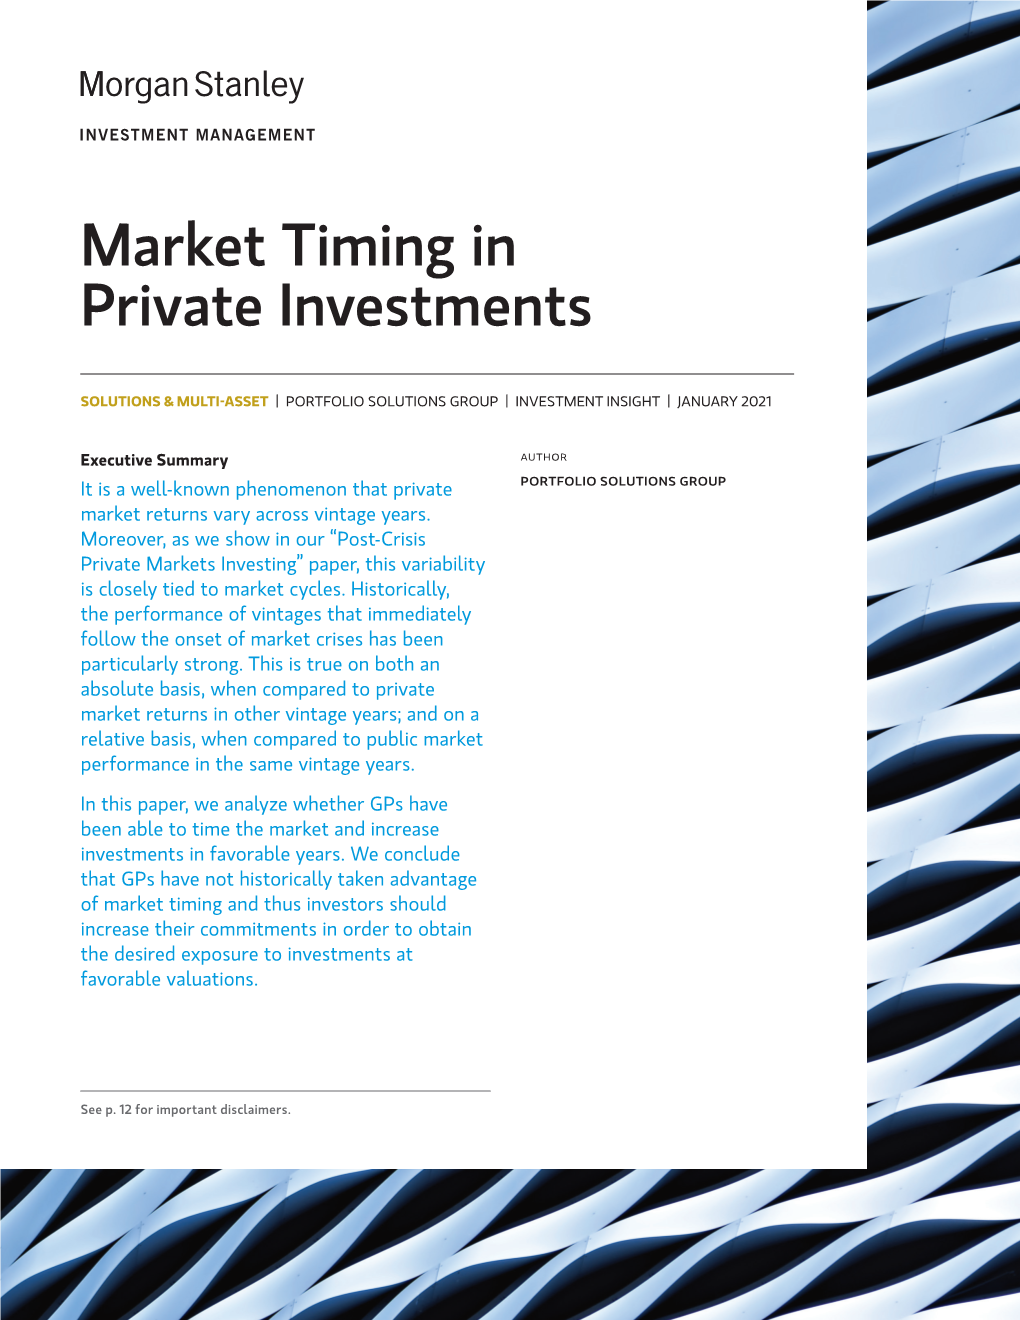 Market Timing in Private Investments